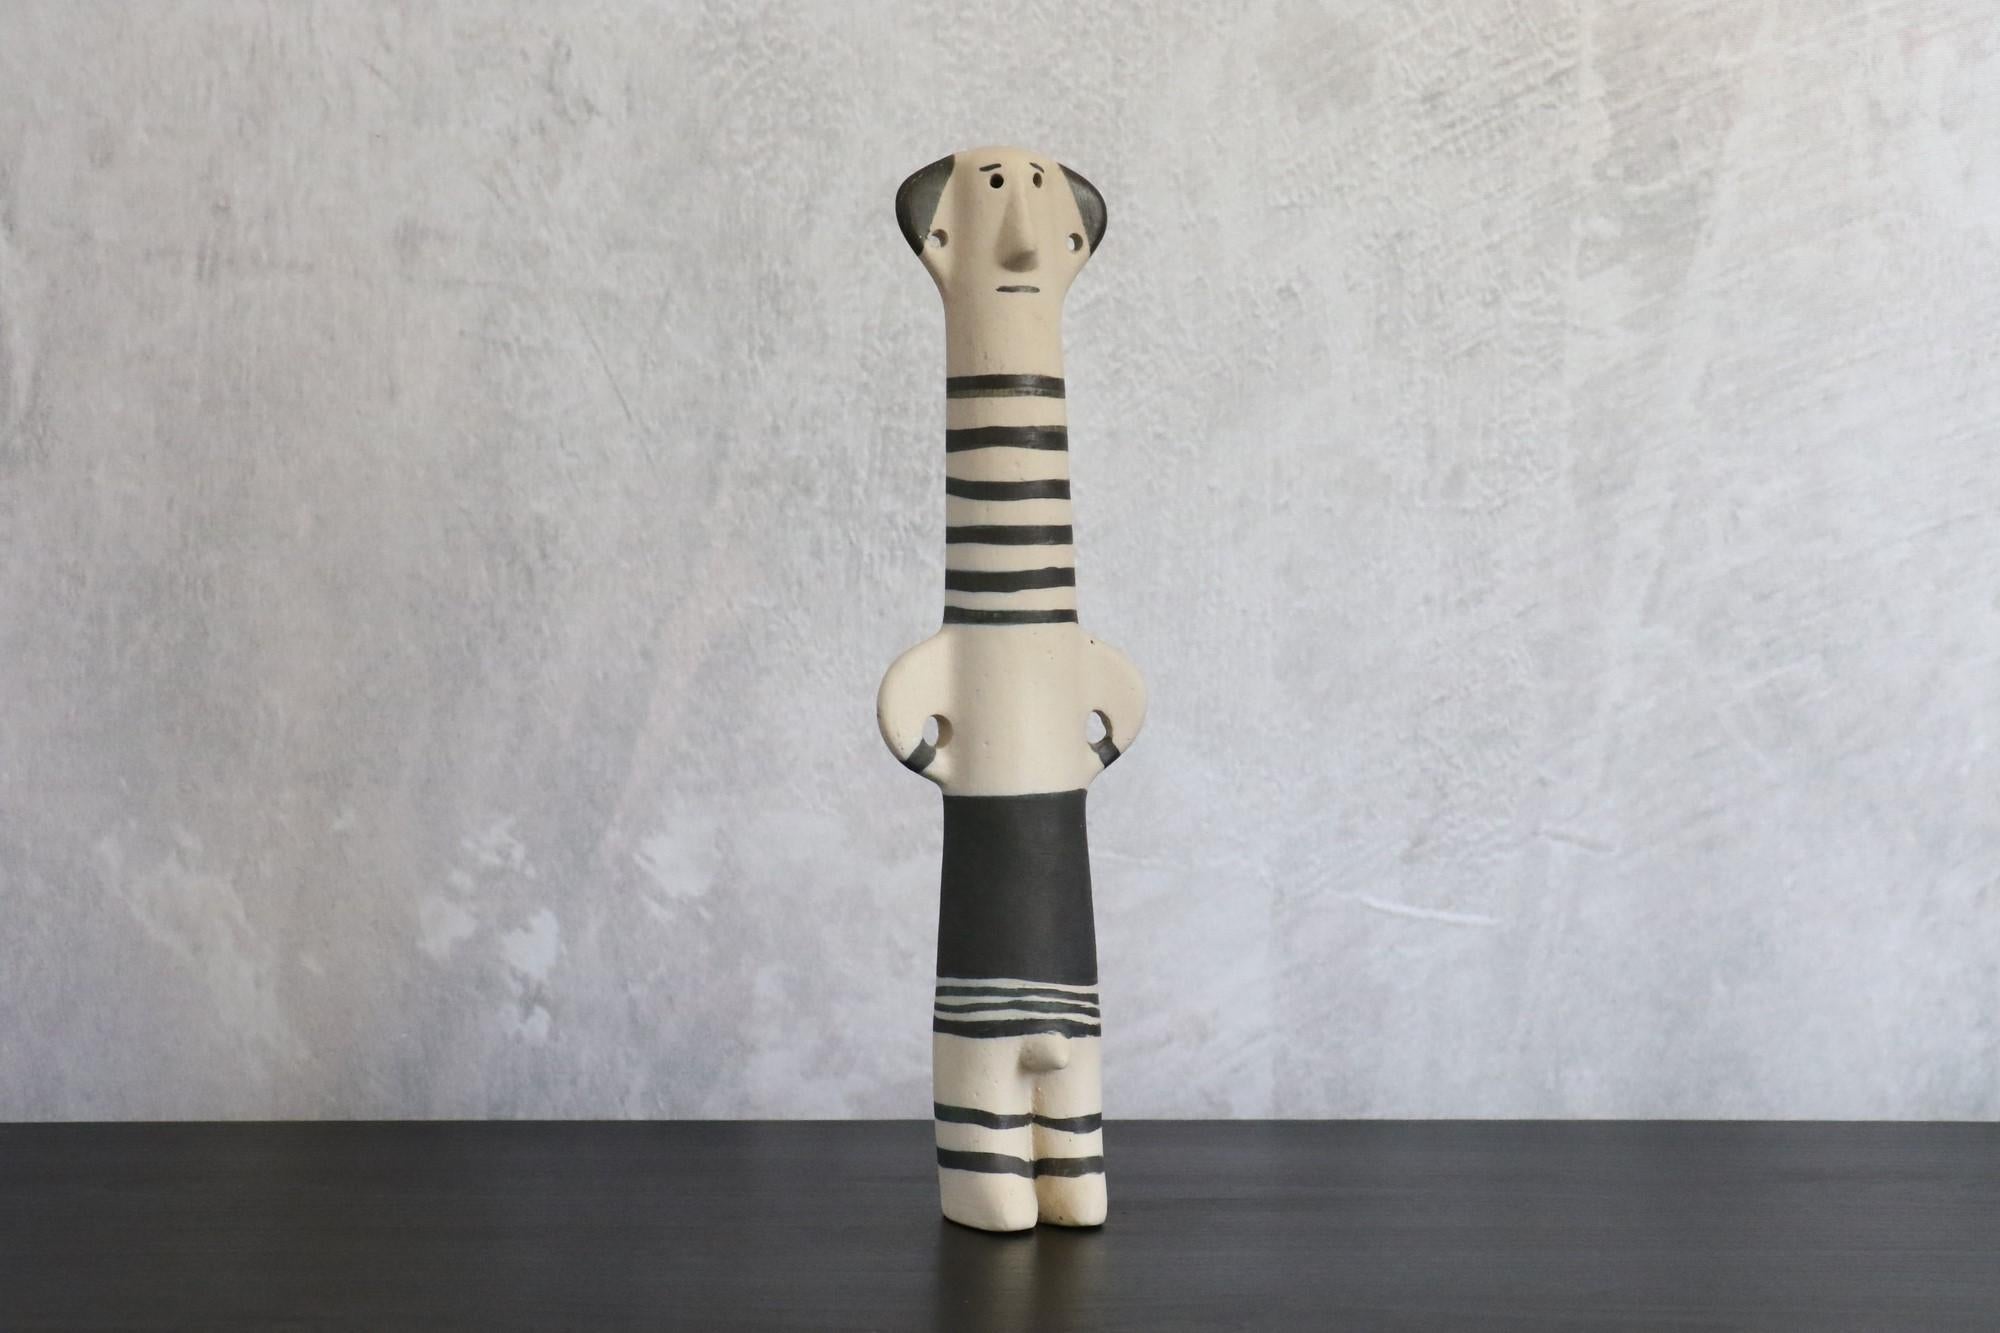 Ceramic Figure by Gerhard Liebenthron, Germany, 1970, Figurative Man Totem

Very decorative figurative ceramic. We can see in this ceramic work, representing a standing man, different stylistic influences.

The character is stylized, its long